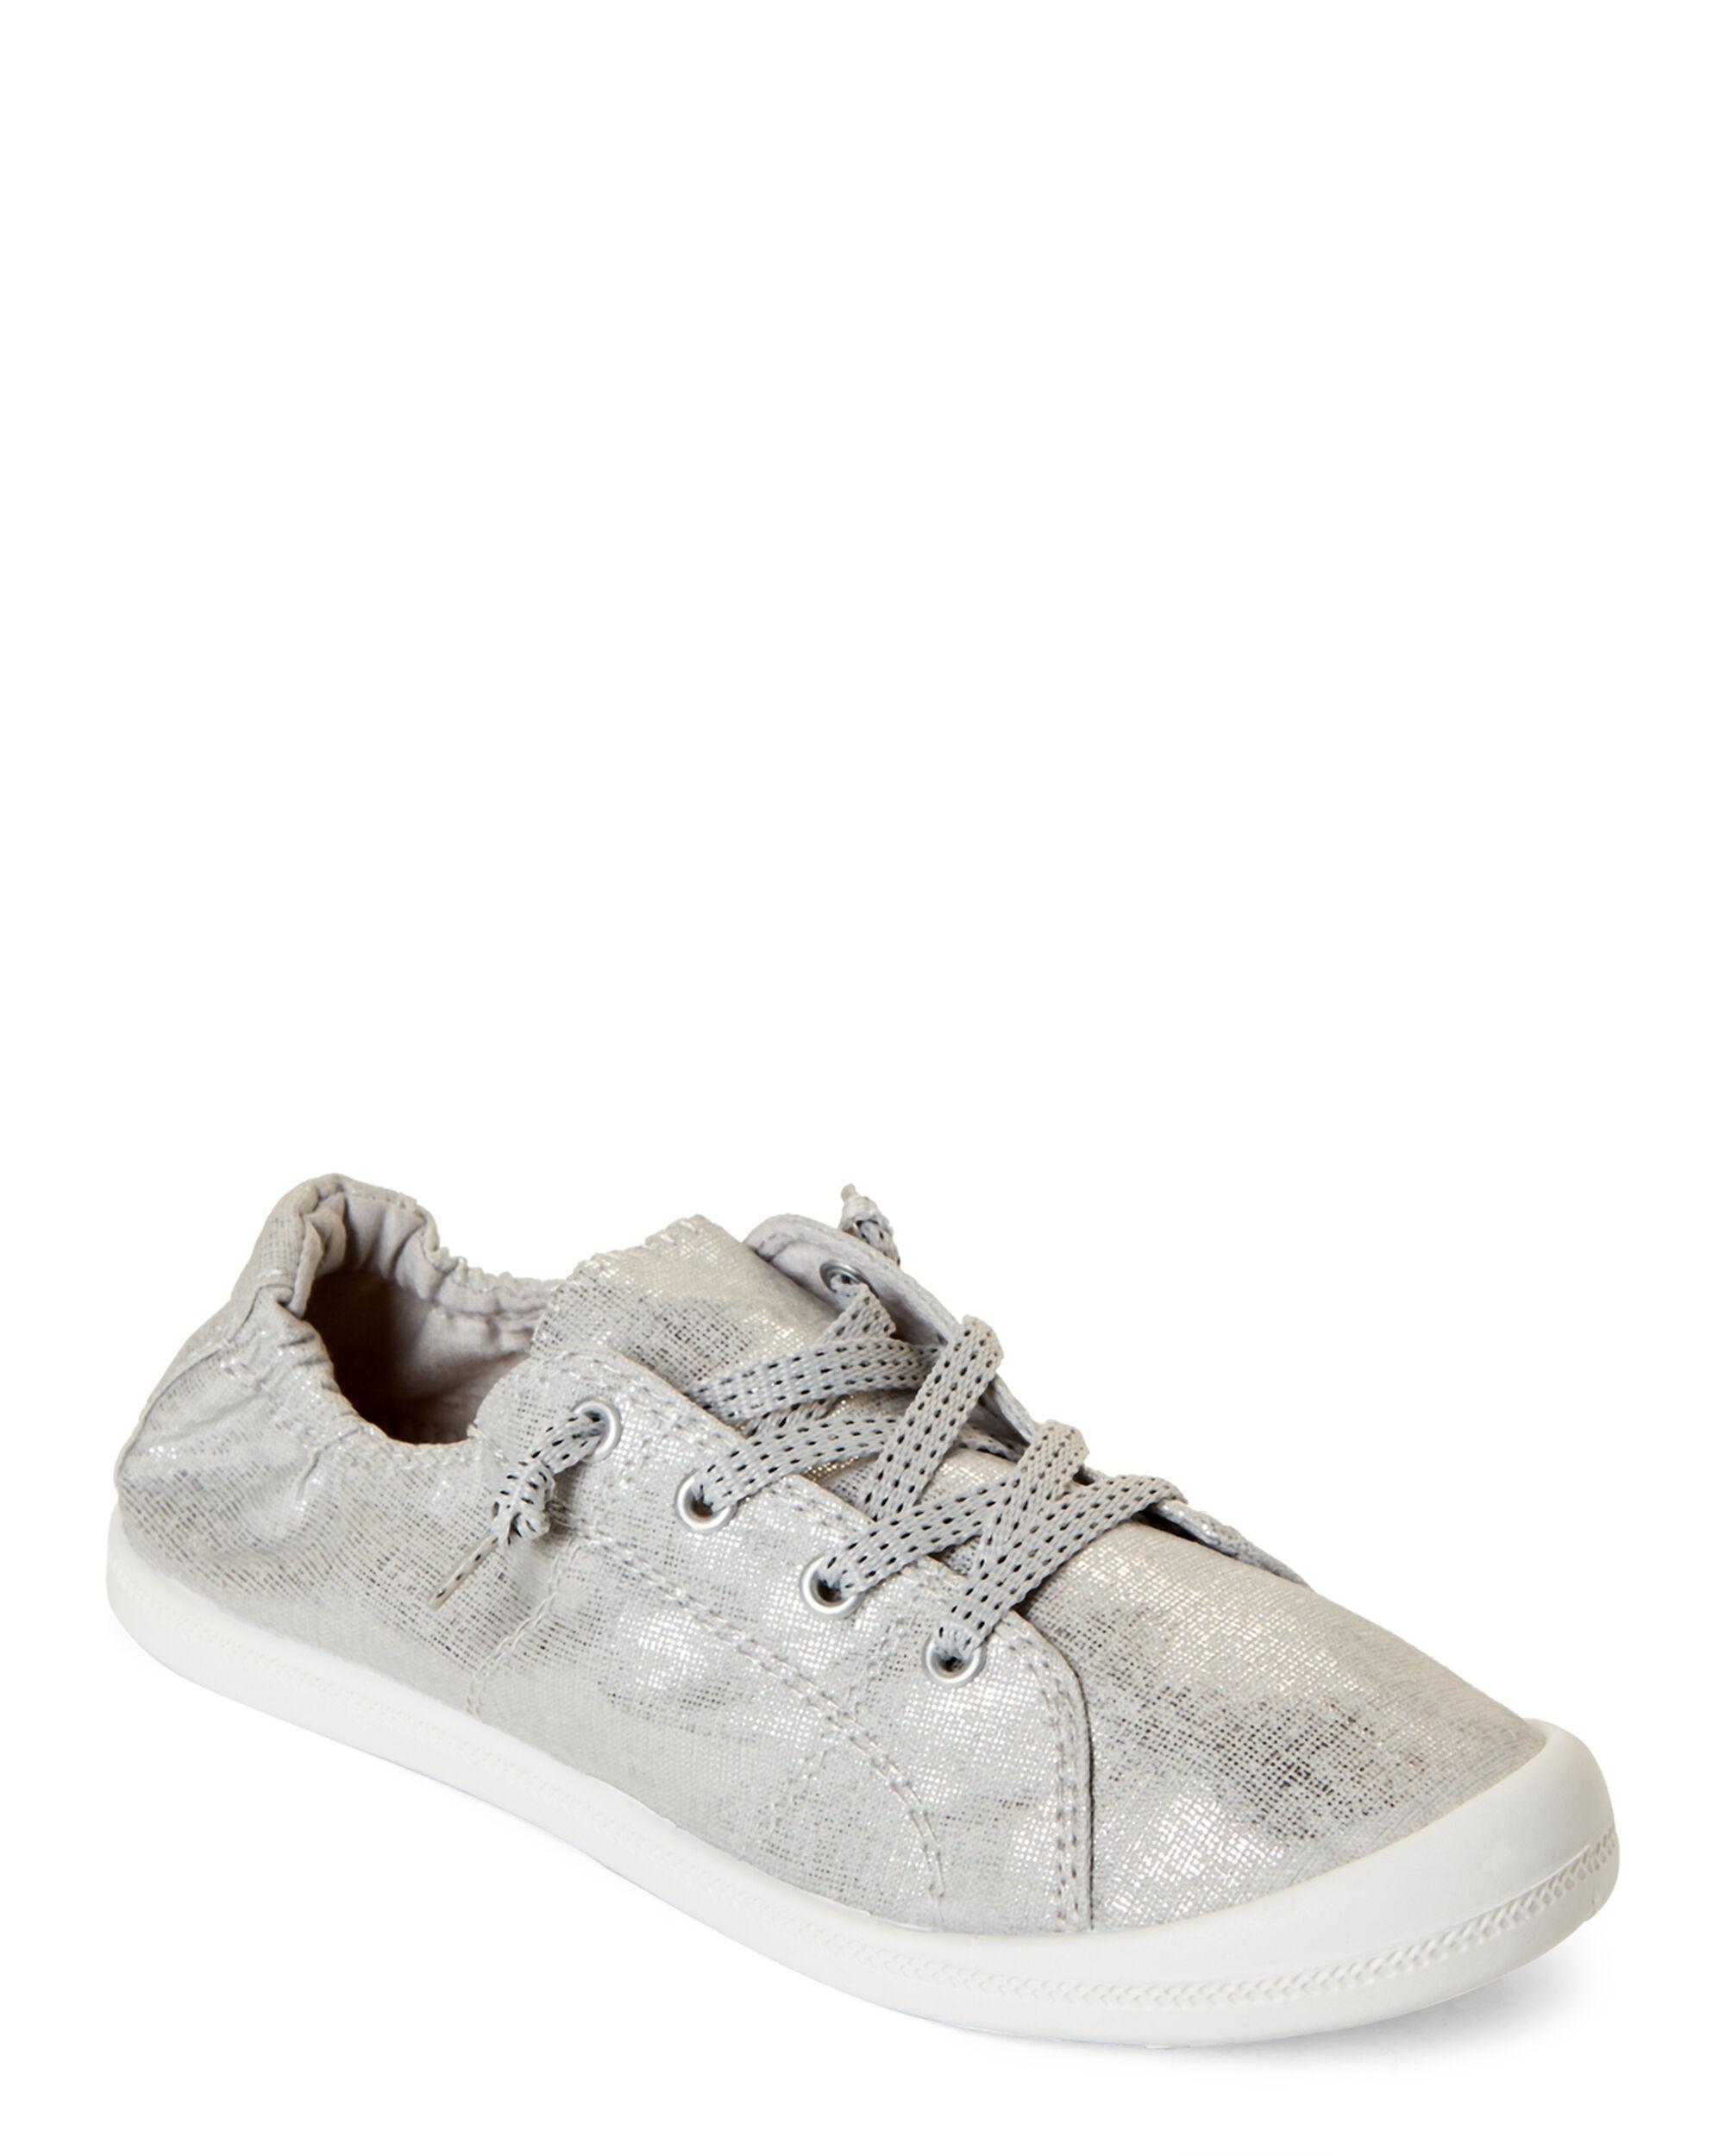 Madden Girl Canvas Silver Baailey Metallic Slip-on Sneakers - Lyst